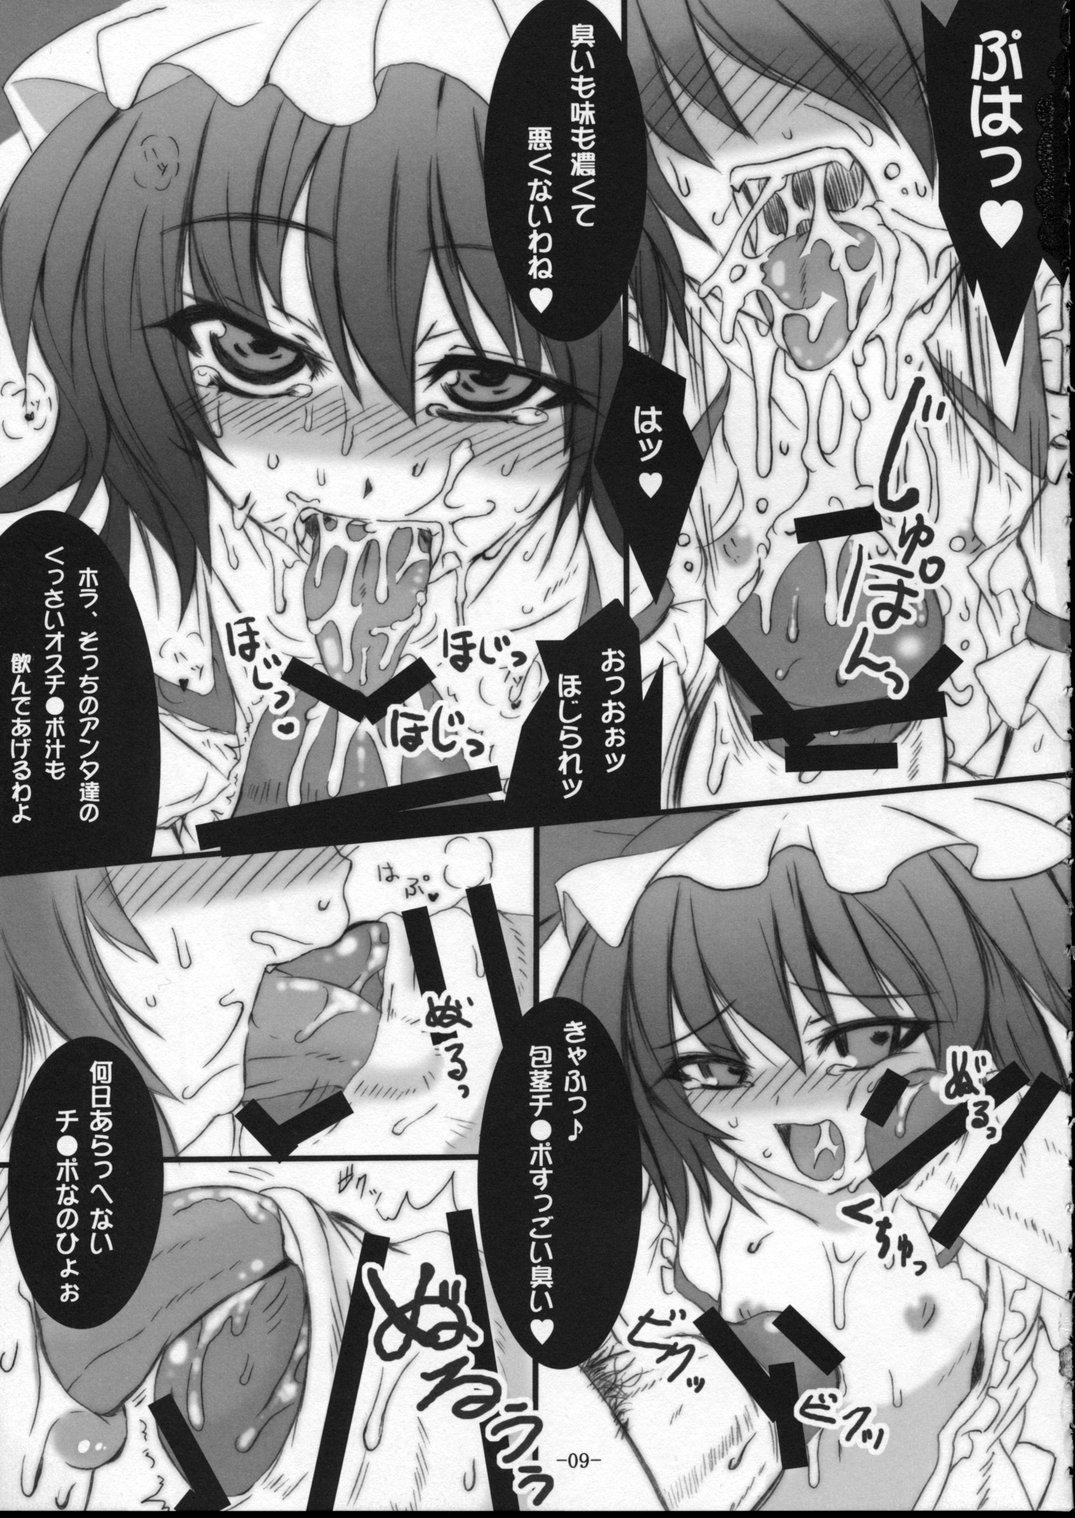 Slut INVADED SCARLET - Touhou project Pussyfucking - Page 8